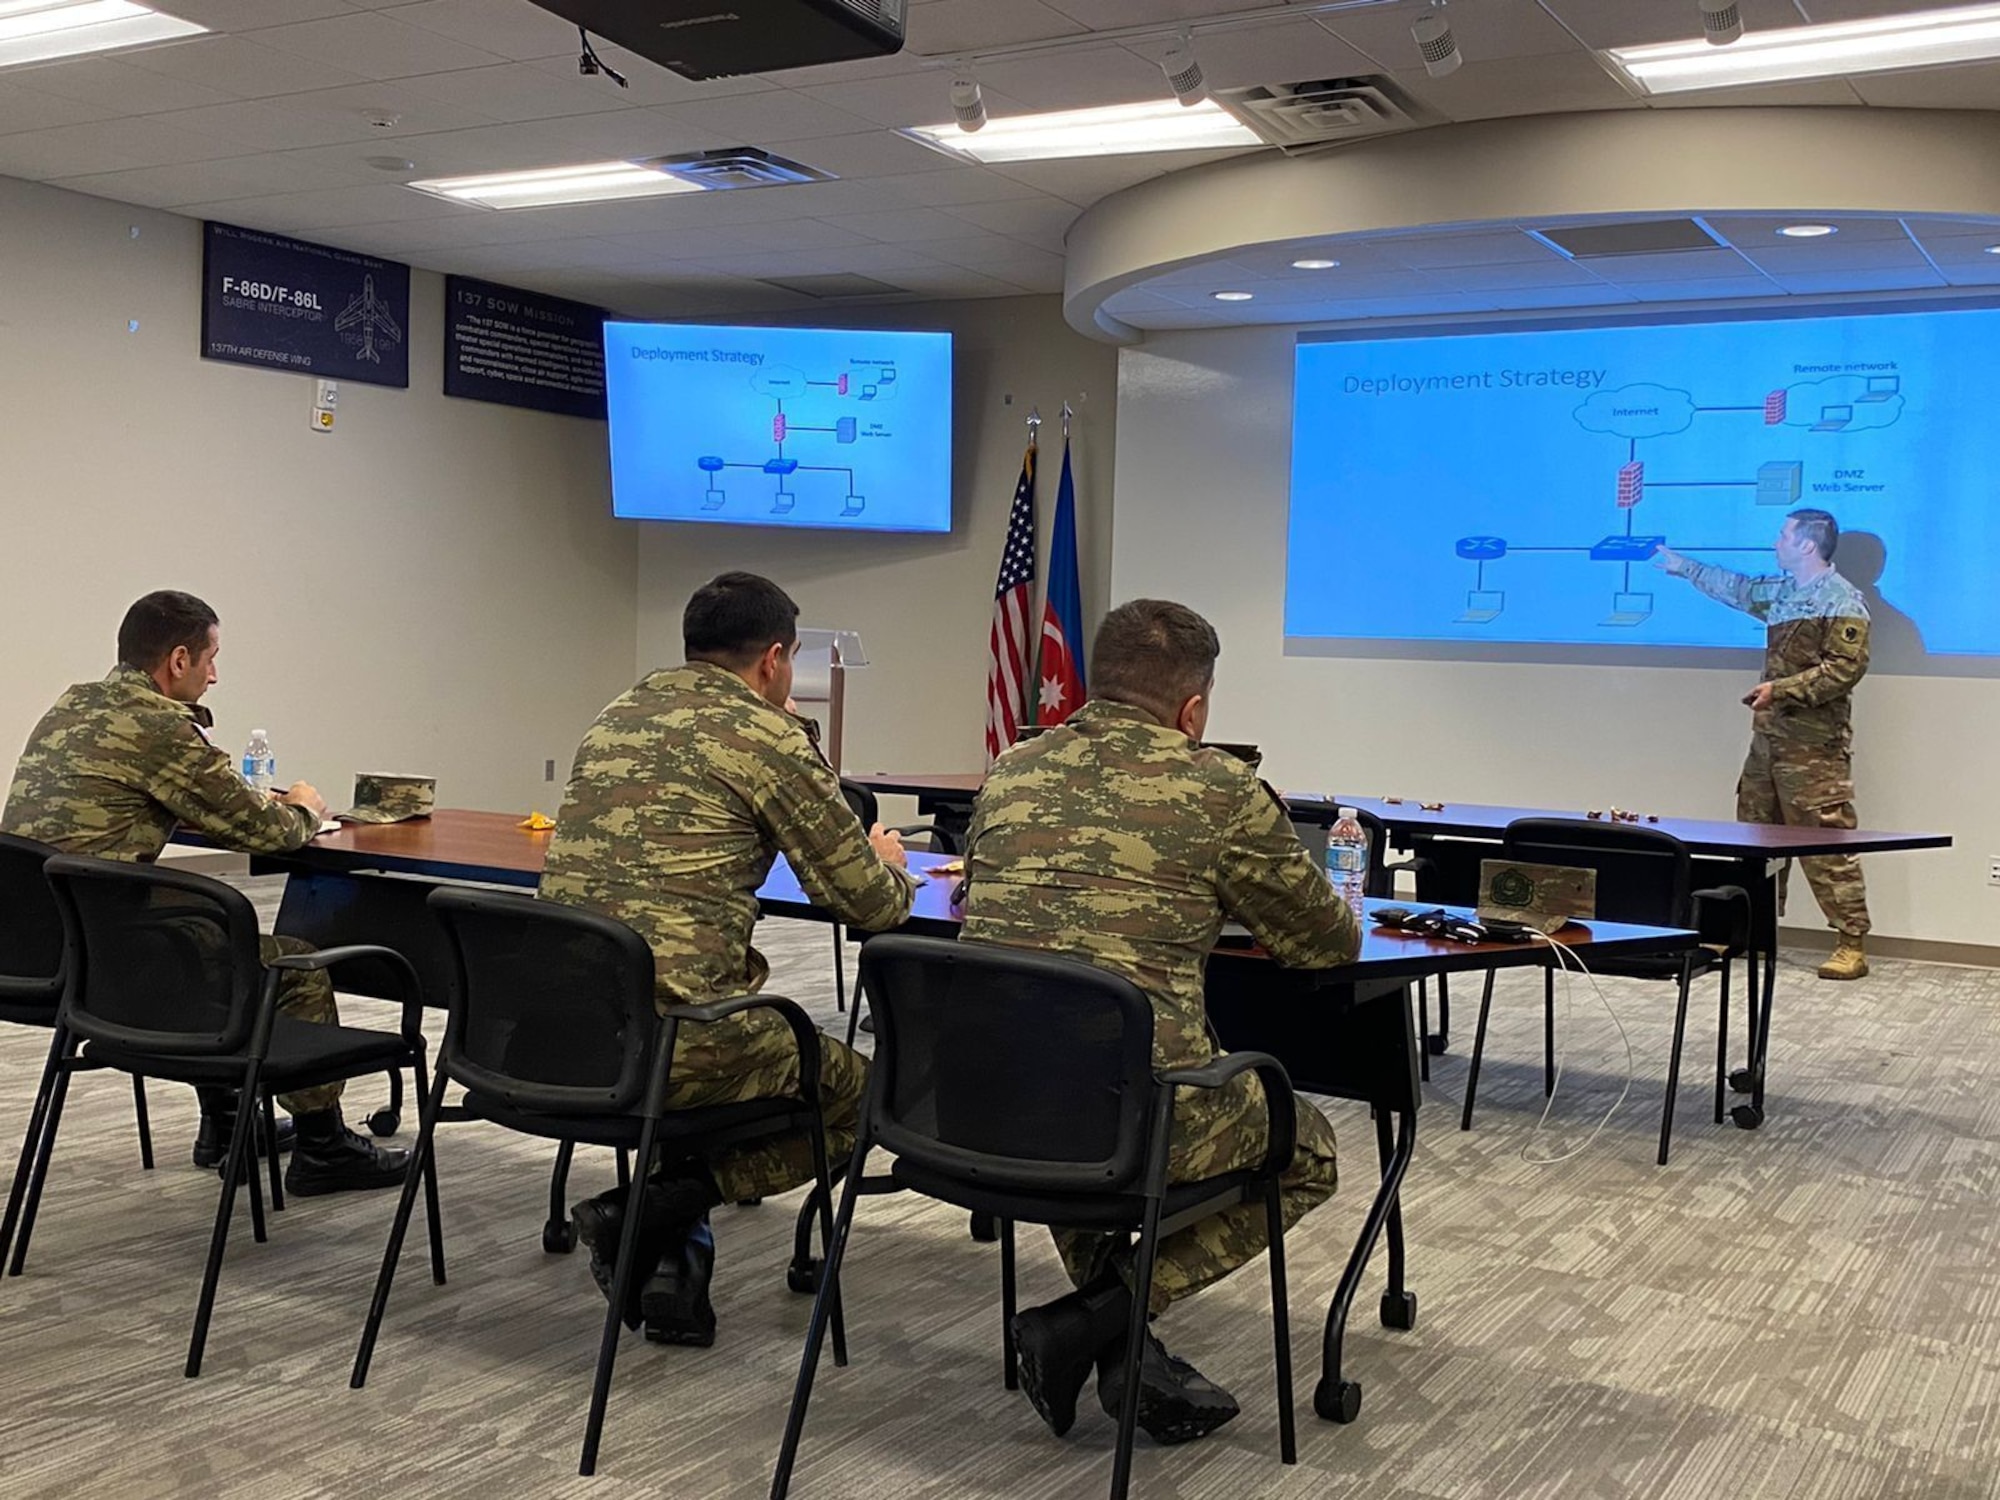 Cyber security officers from the Azerbaijan army listen to a presentation by an Oklahoma Air National Guard member during a cyber security knowledge exchange hosted by the Oklahoma National Guard at the Will Rogers Air National Guard Base in Oklahoma City. The Oklahoma National Guard hosted a multi-day exchange focused on building cooperation between the two partners. (Photo provided by Lt. Col. Sharon McCarty)